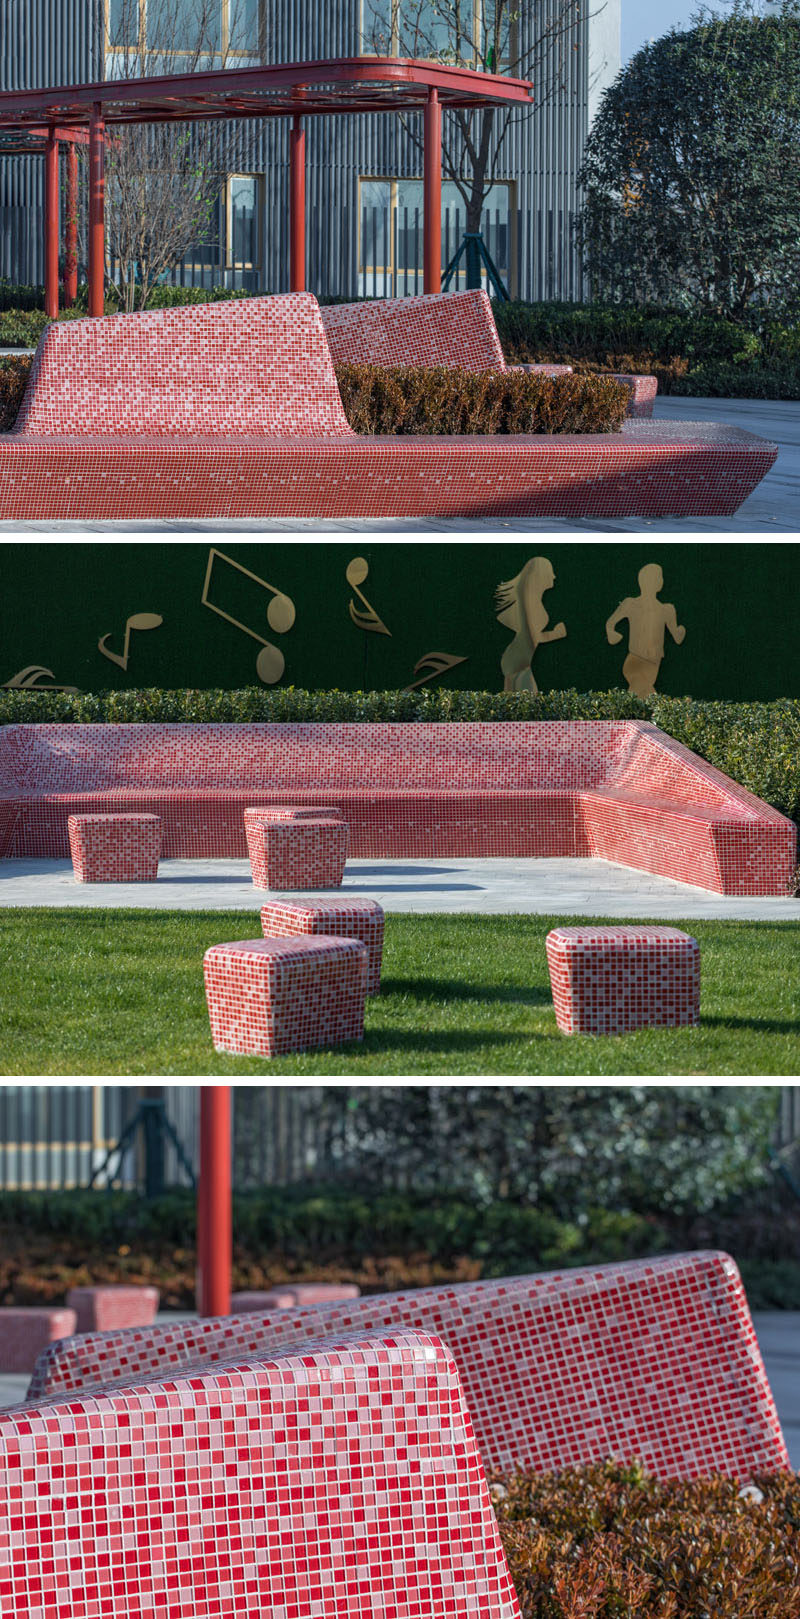 This part has sculptural seating that's covered in red and pink tiles which complement the color of the pergola. #PublicSeating #StreetFurniture